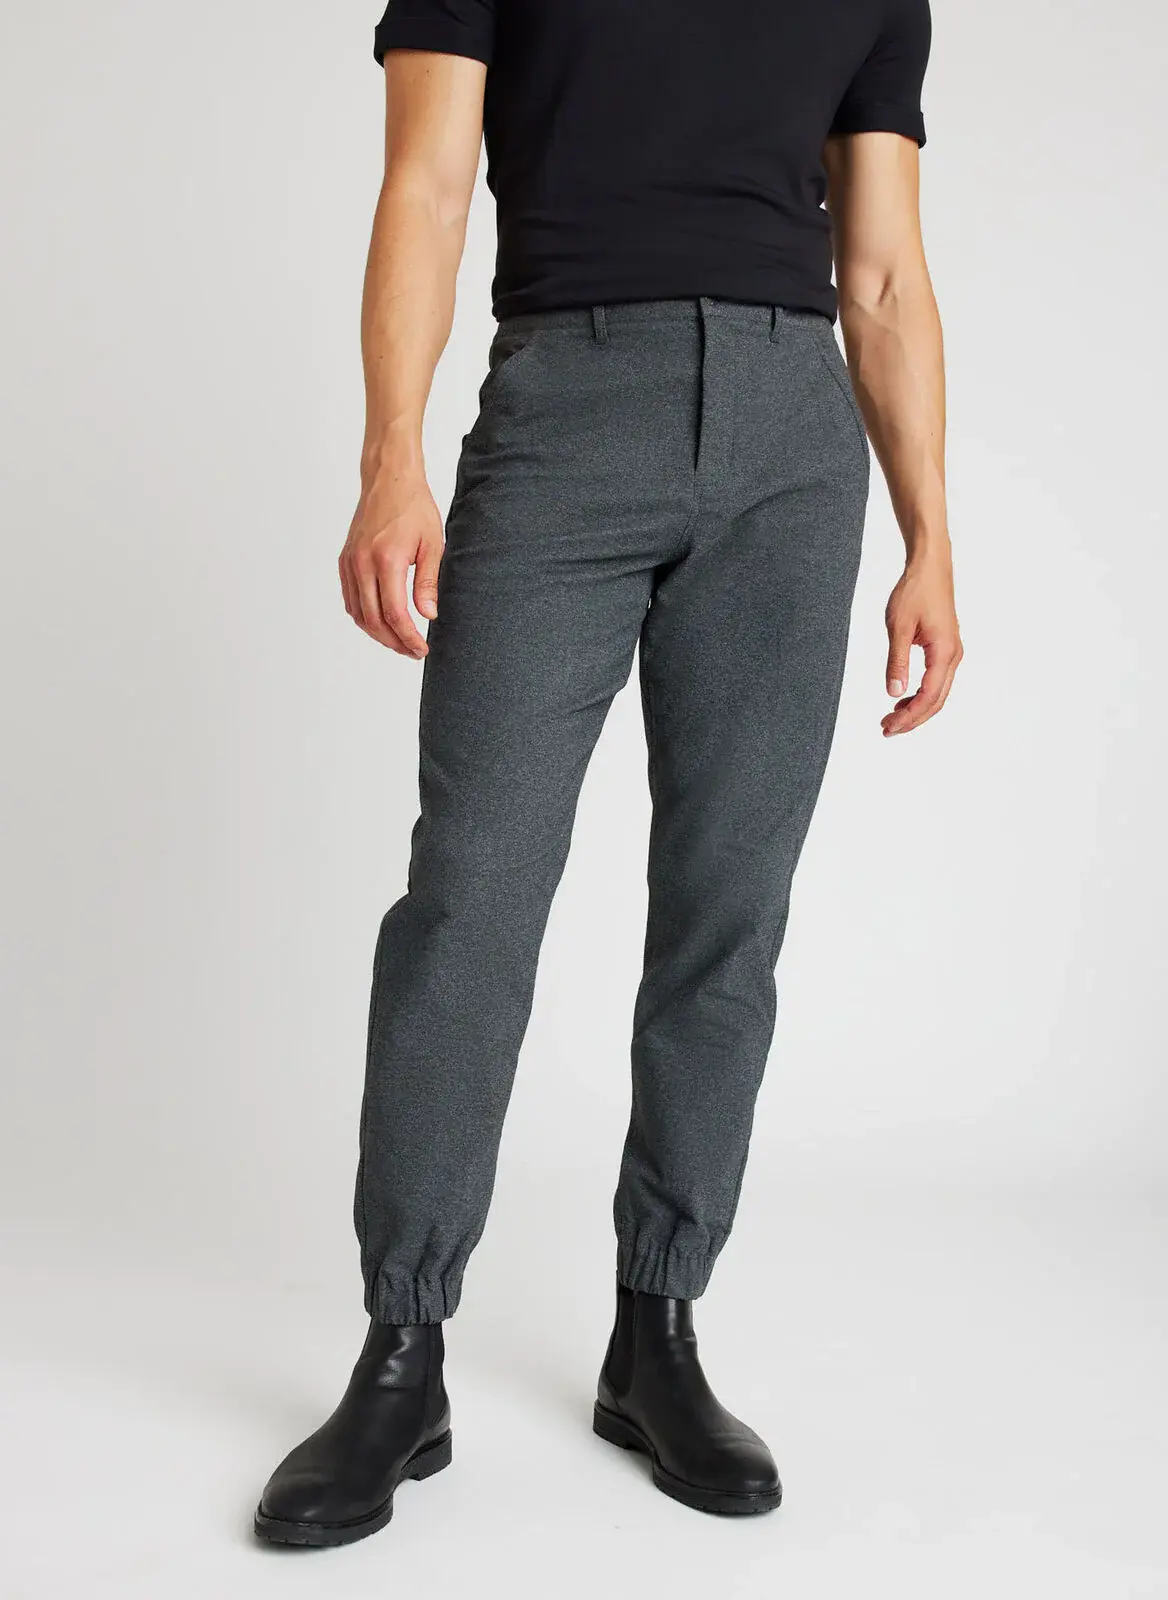 Kit And Ace Stride Winter Joggers Standard Fit. 1